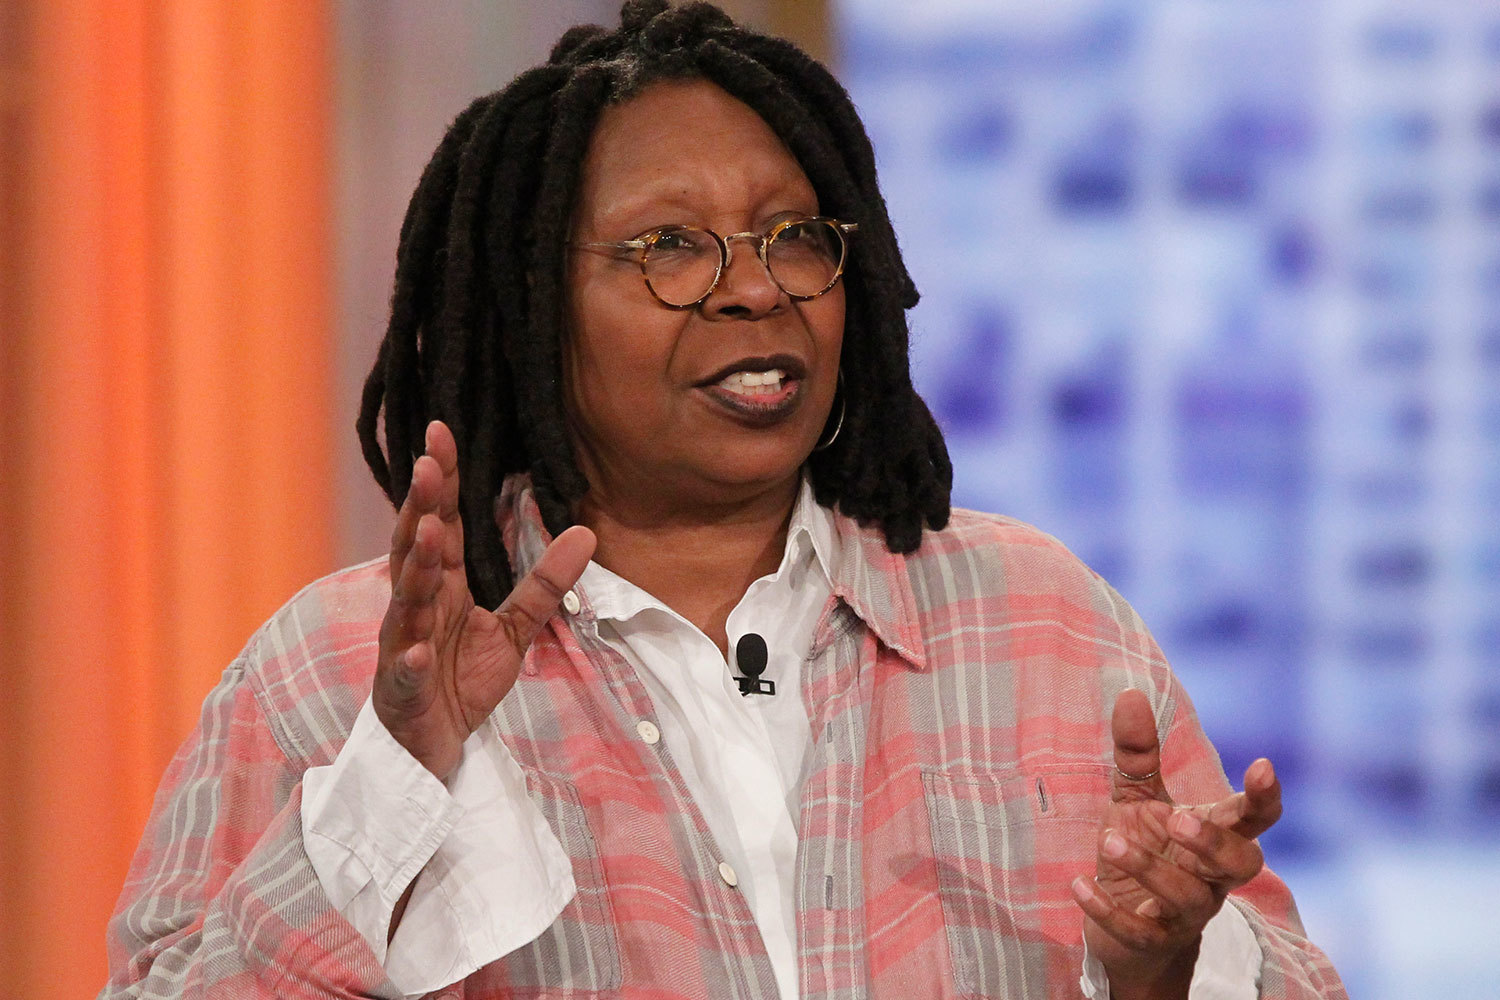 Whoopi Goldberg Suspended from The View for Race-Based Holocaust Remarks